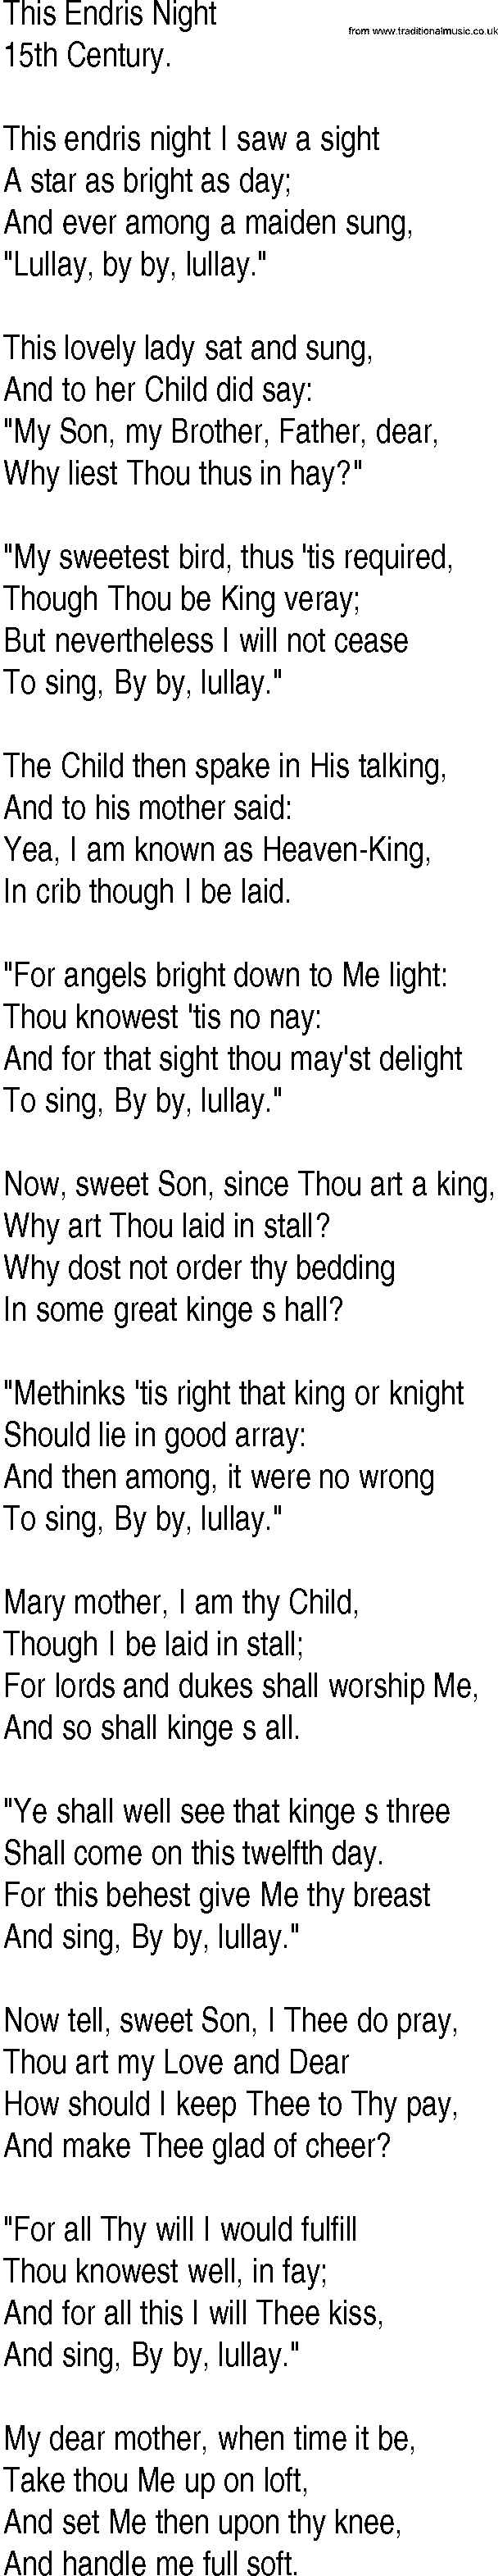 Hymn and Gospel Song: This Endris Night by th Century lyrics